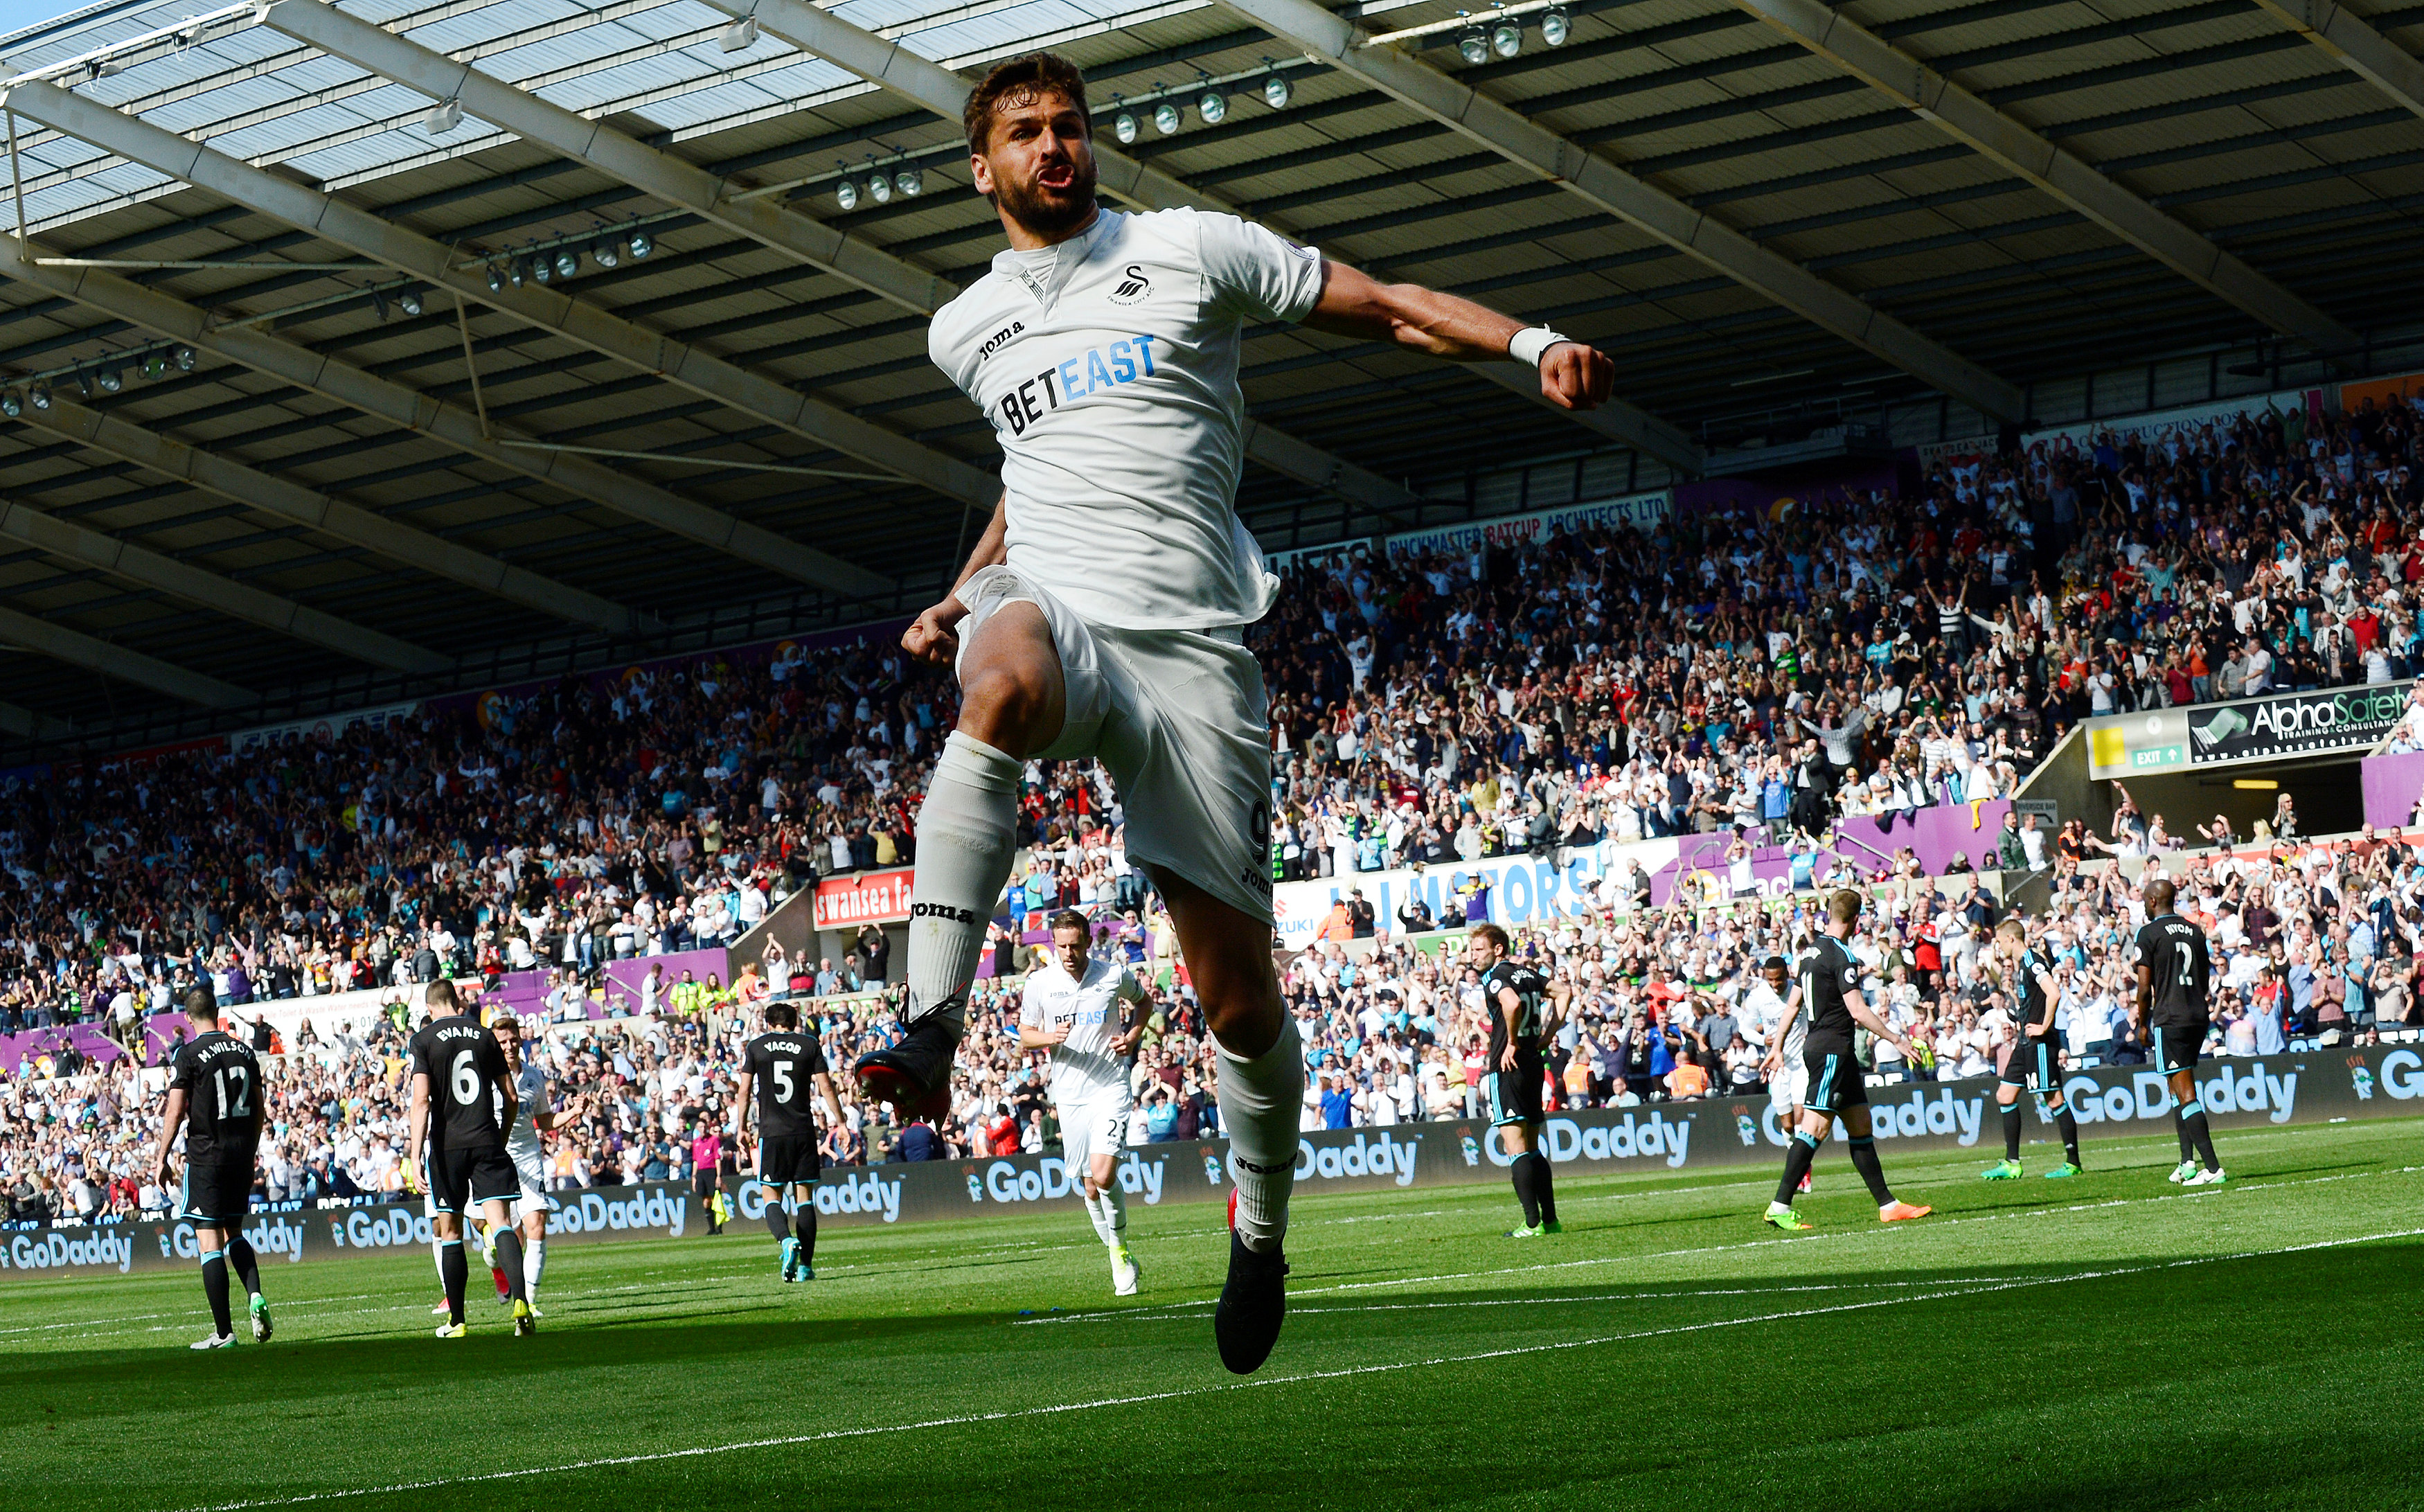 Football: Swansea sign off by beating West Brom